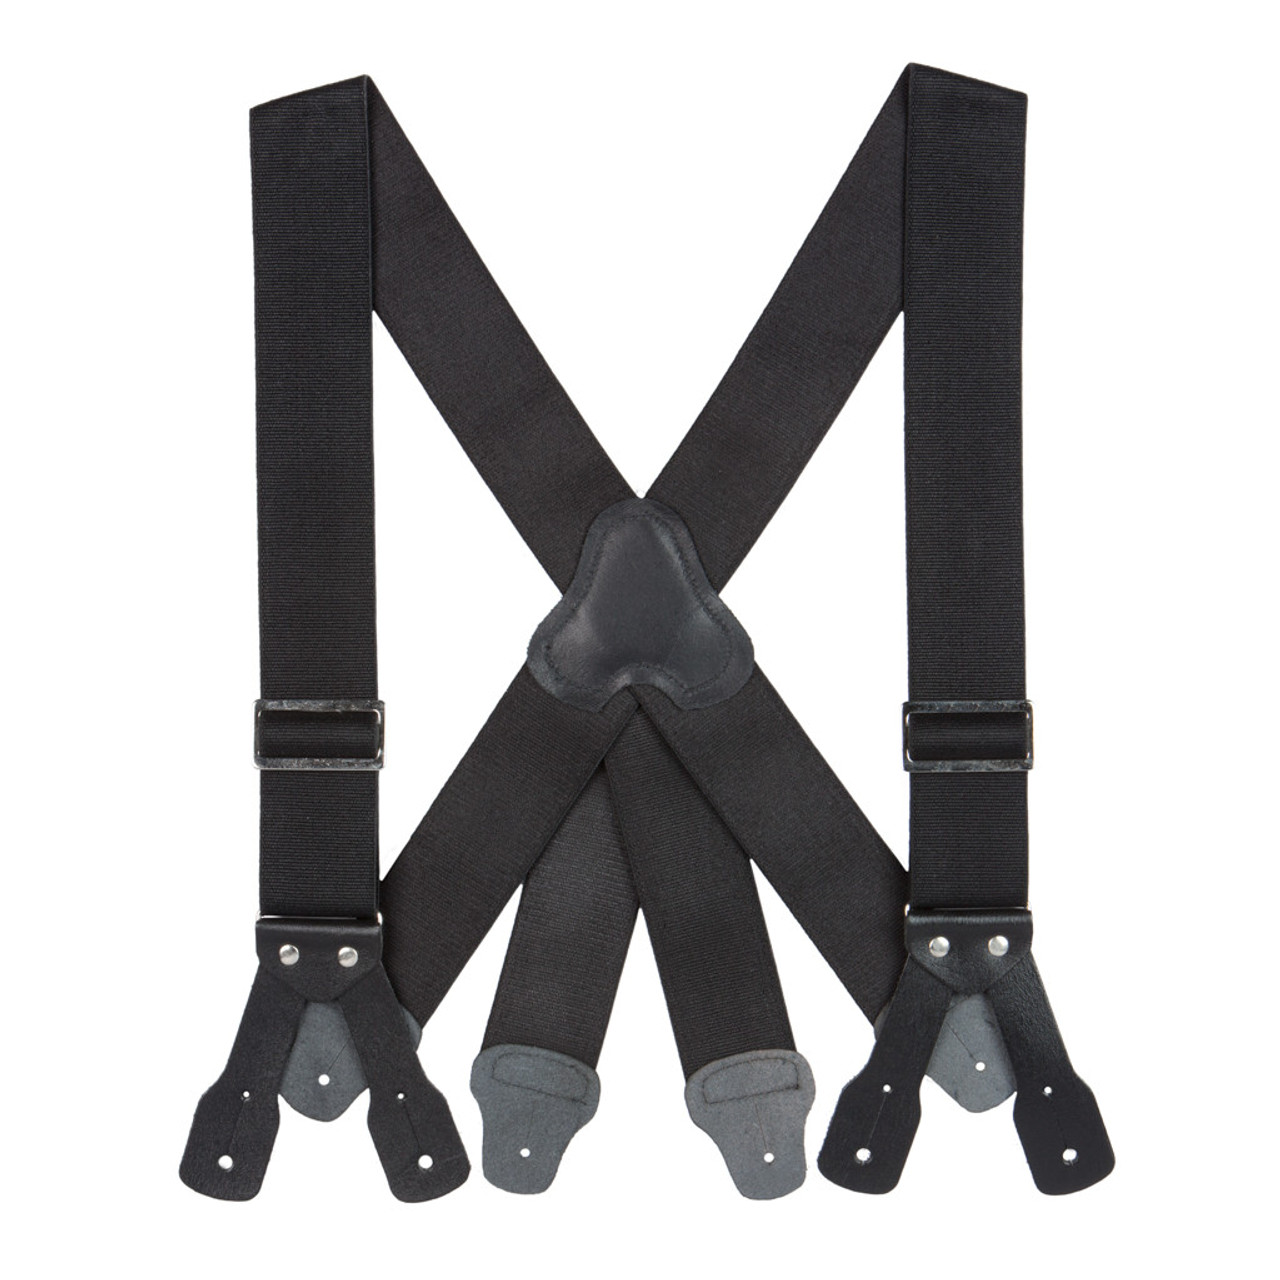 Firefighter Suspenders with Riveted Black Leather